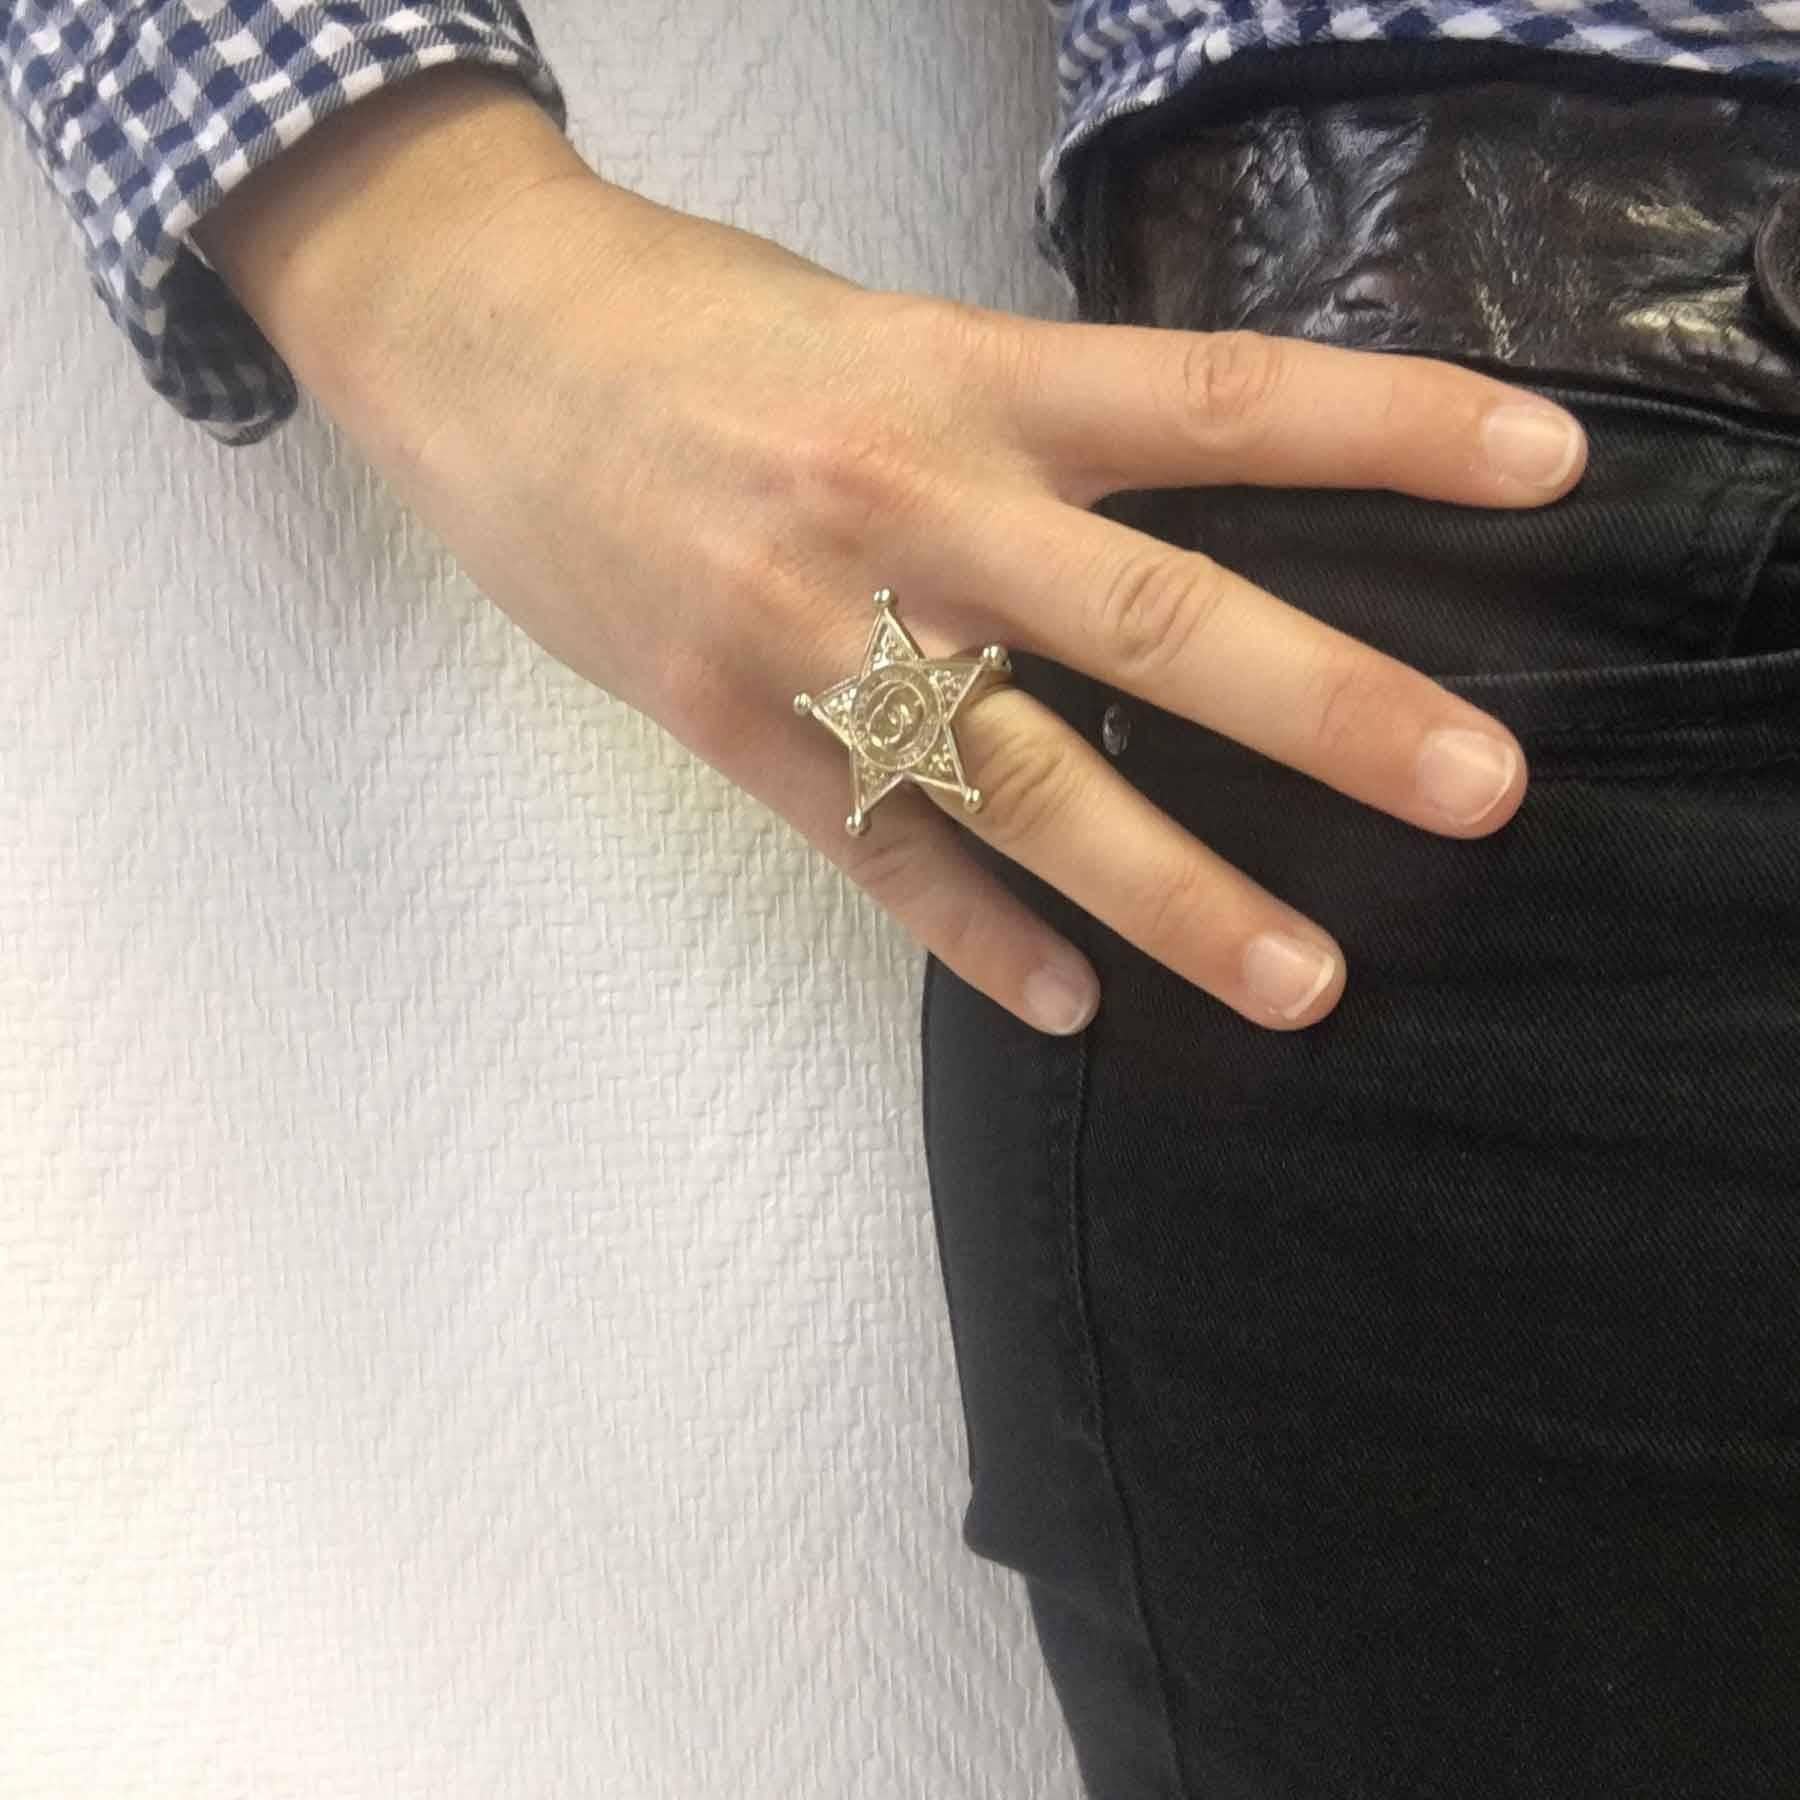 Chanel ring gilded metal sheriff star from the 'Paris-Dallas' collection.

collection 2013/2014.

Size 50. 

Dimensions: 1.6 cm inside diameter

Delivered in a dustbag Valois Vintage Paris